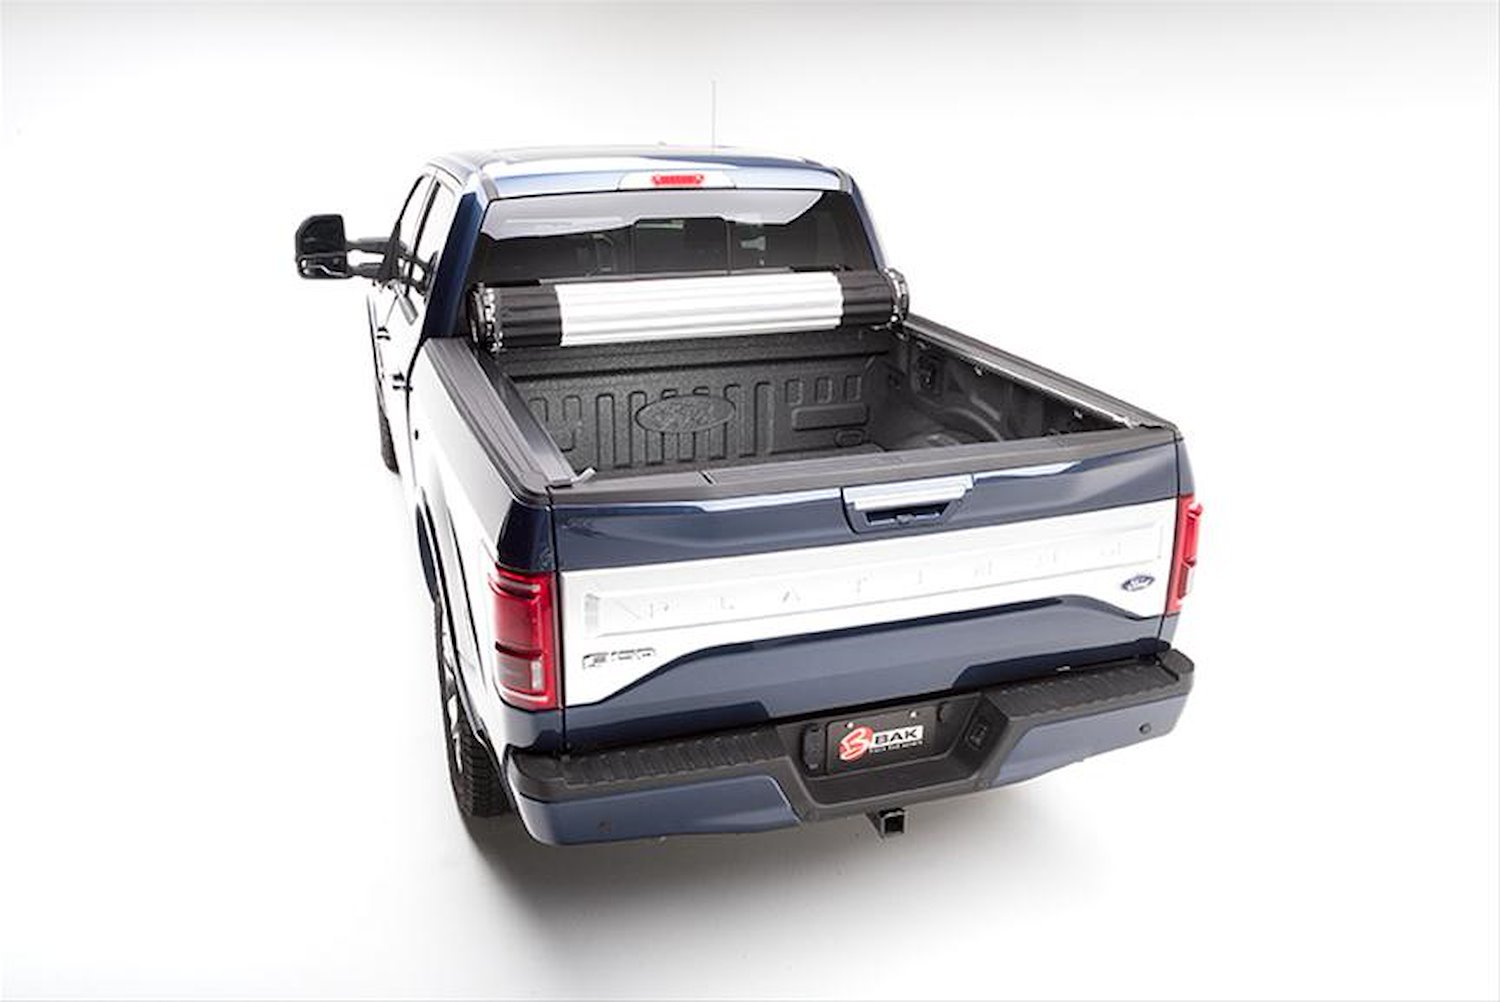 39307 Revolver X2 for 04-14 Ford F150 6.7 ft. Bed, Roll-Up Hard Cover Style [Black Finish]